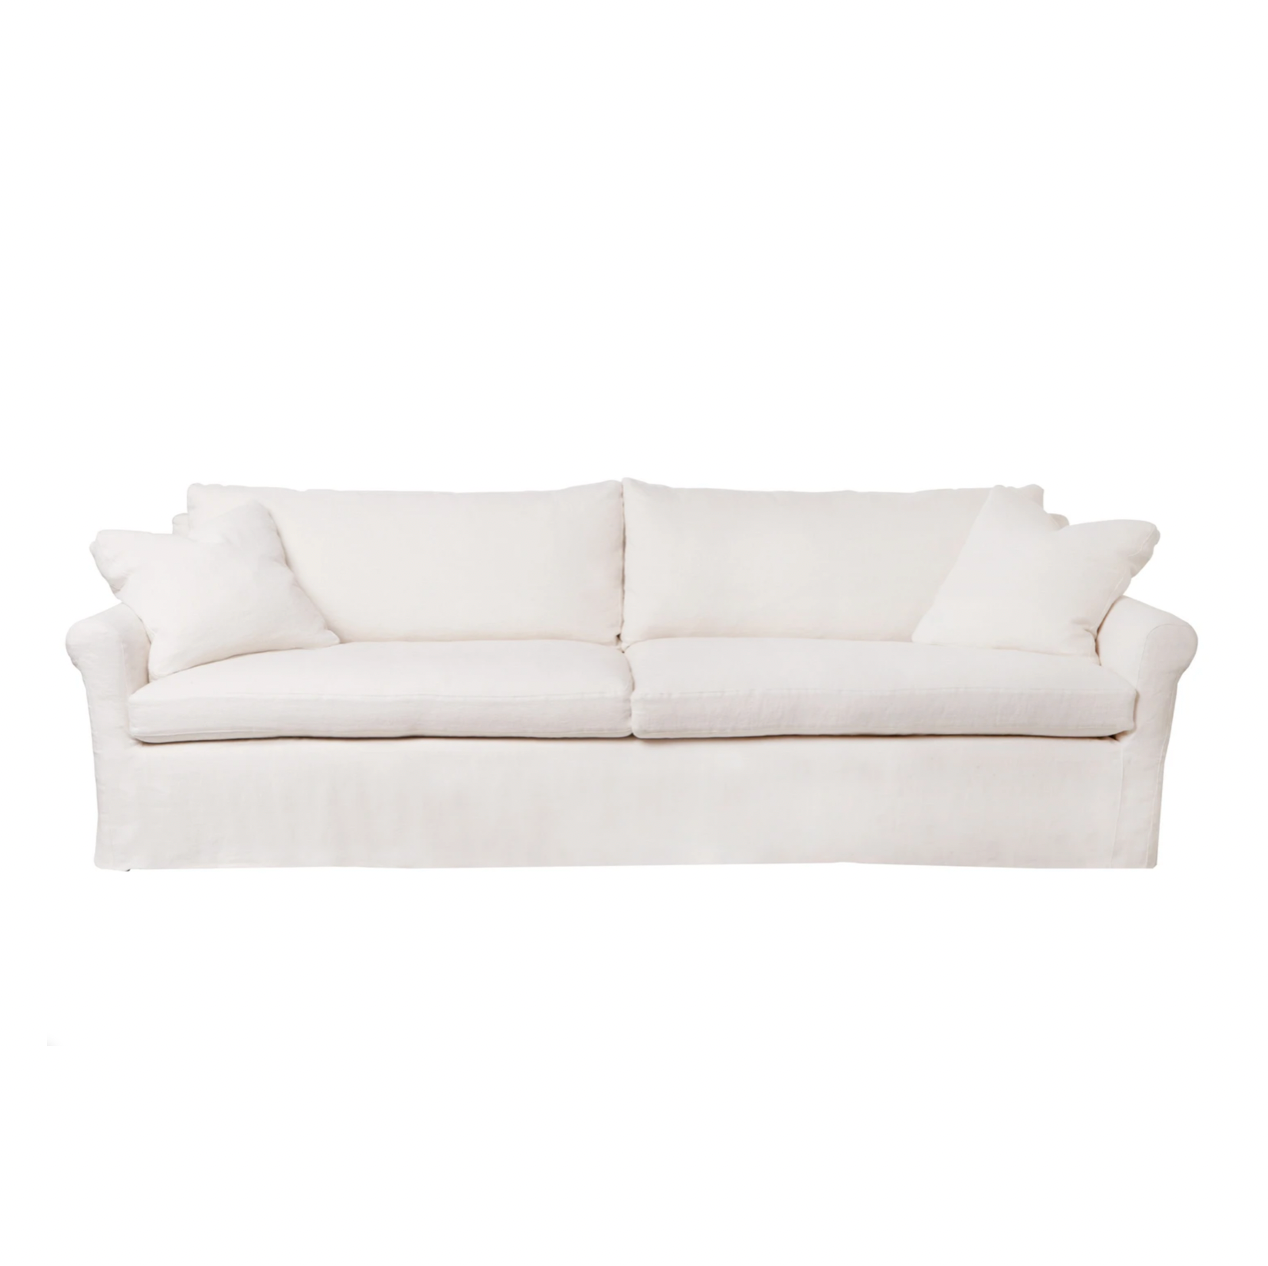 This is not your traditional roll-arm sofa. The Beverly Sofa from Cisco Brothers has a scaled-down roll arm for a more subtle style, allowing it to fit comfortably with any living room ensemble. Shown in fabric Brevard Ivory.  All pieces are priced with a feather cloud package unless otherwise noted.   Overall dimensions: 96"w x 41"d x 32"h